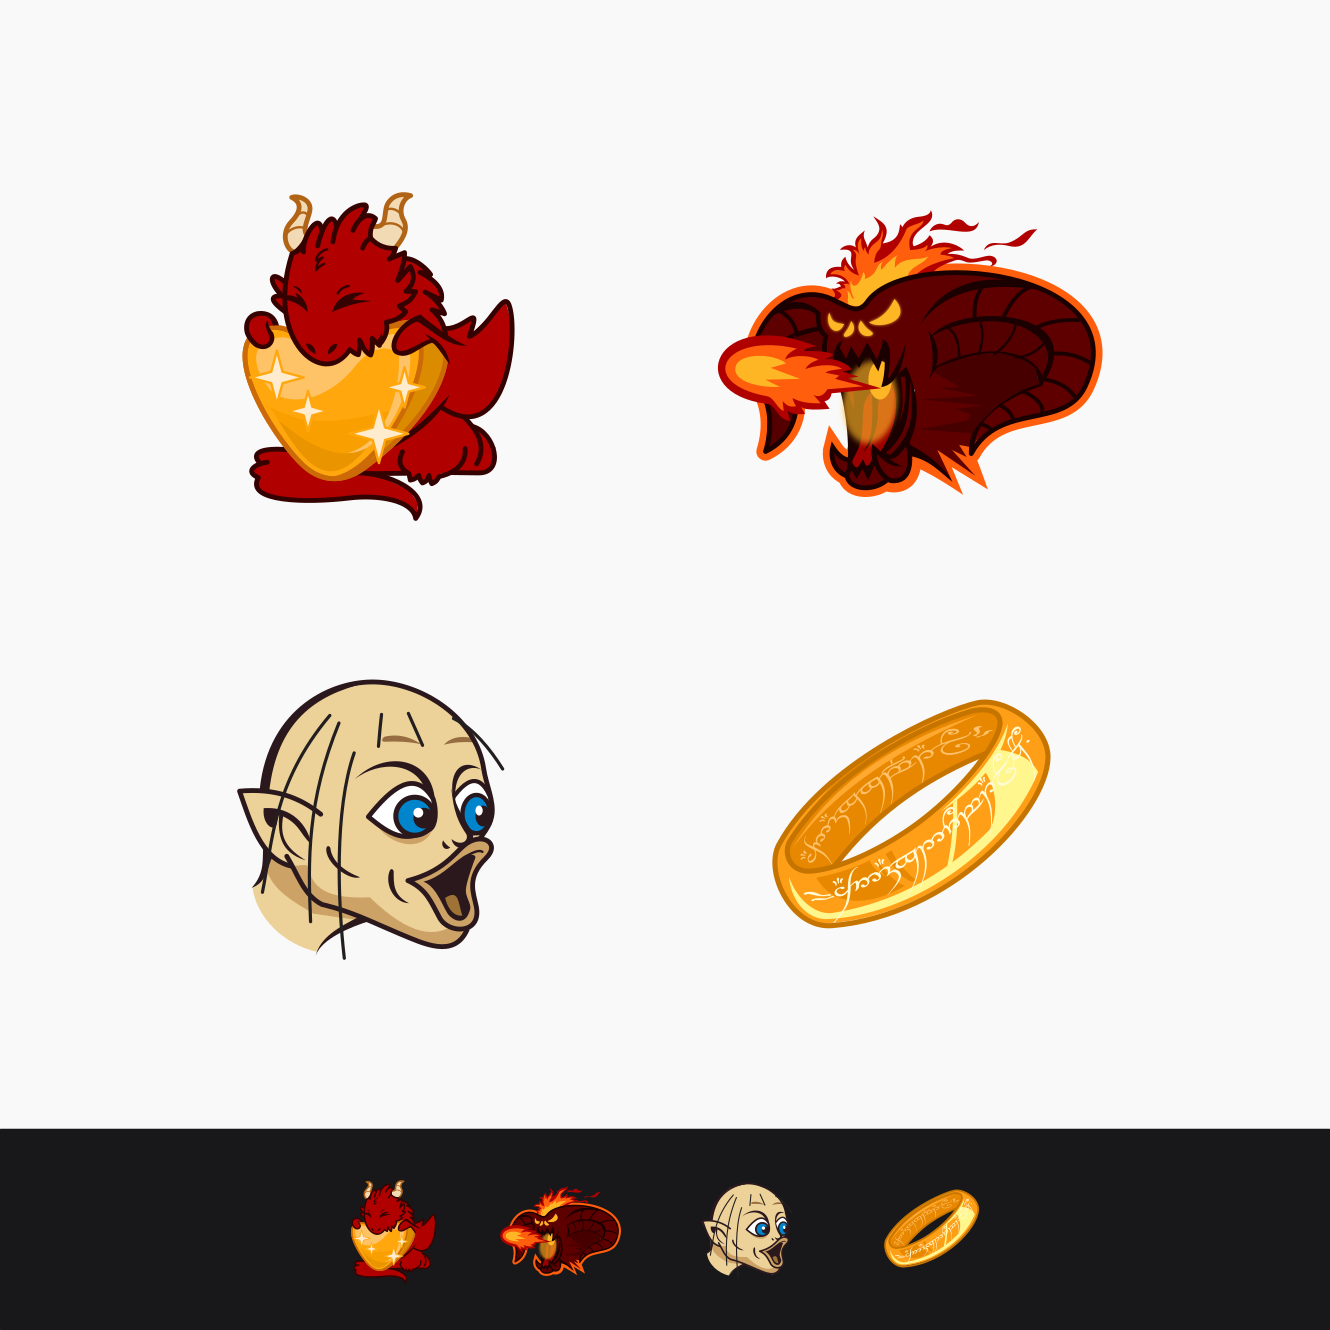 Twitch emotes for ValinorTTV. Designed by Johnery